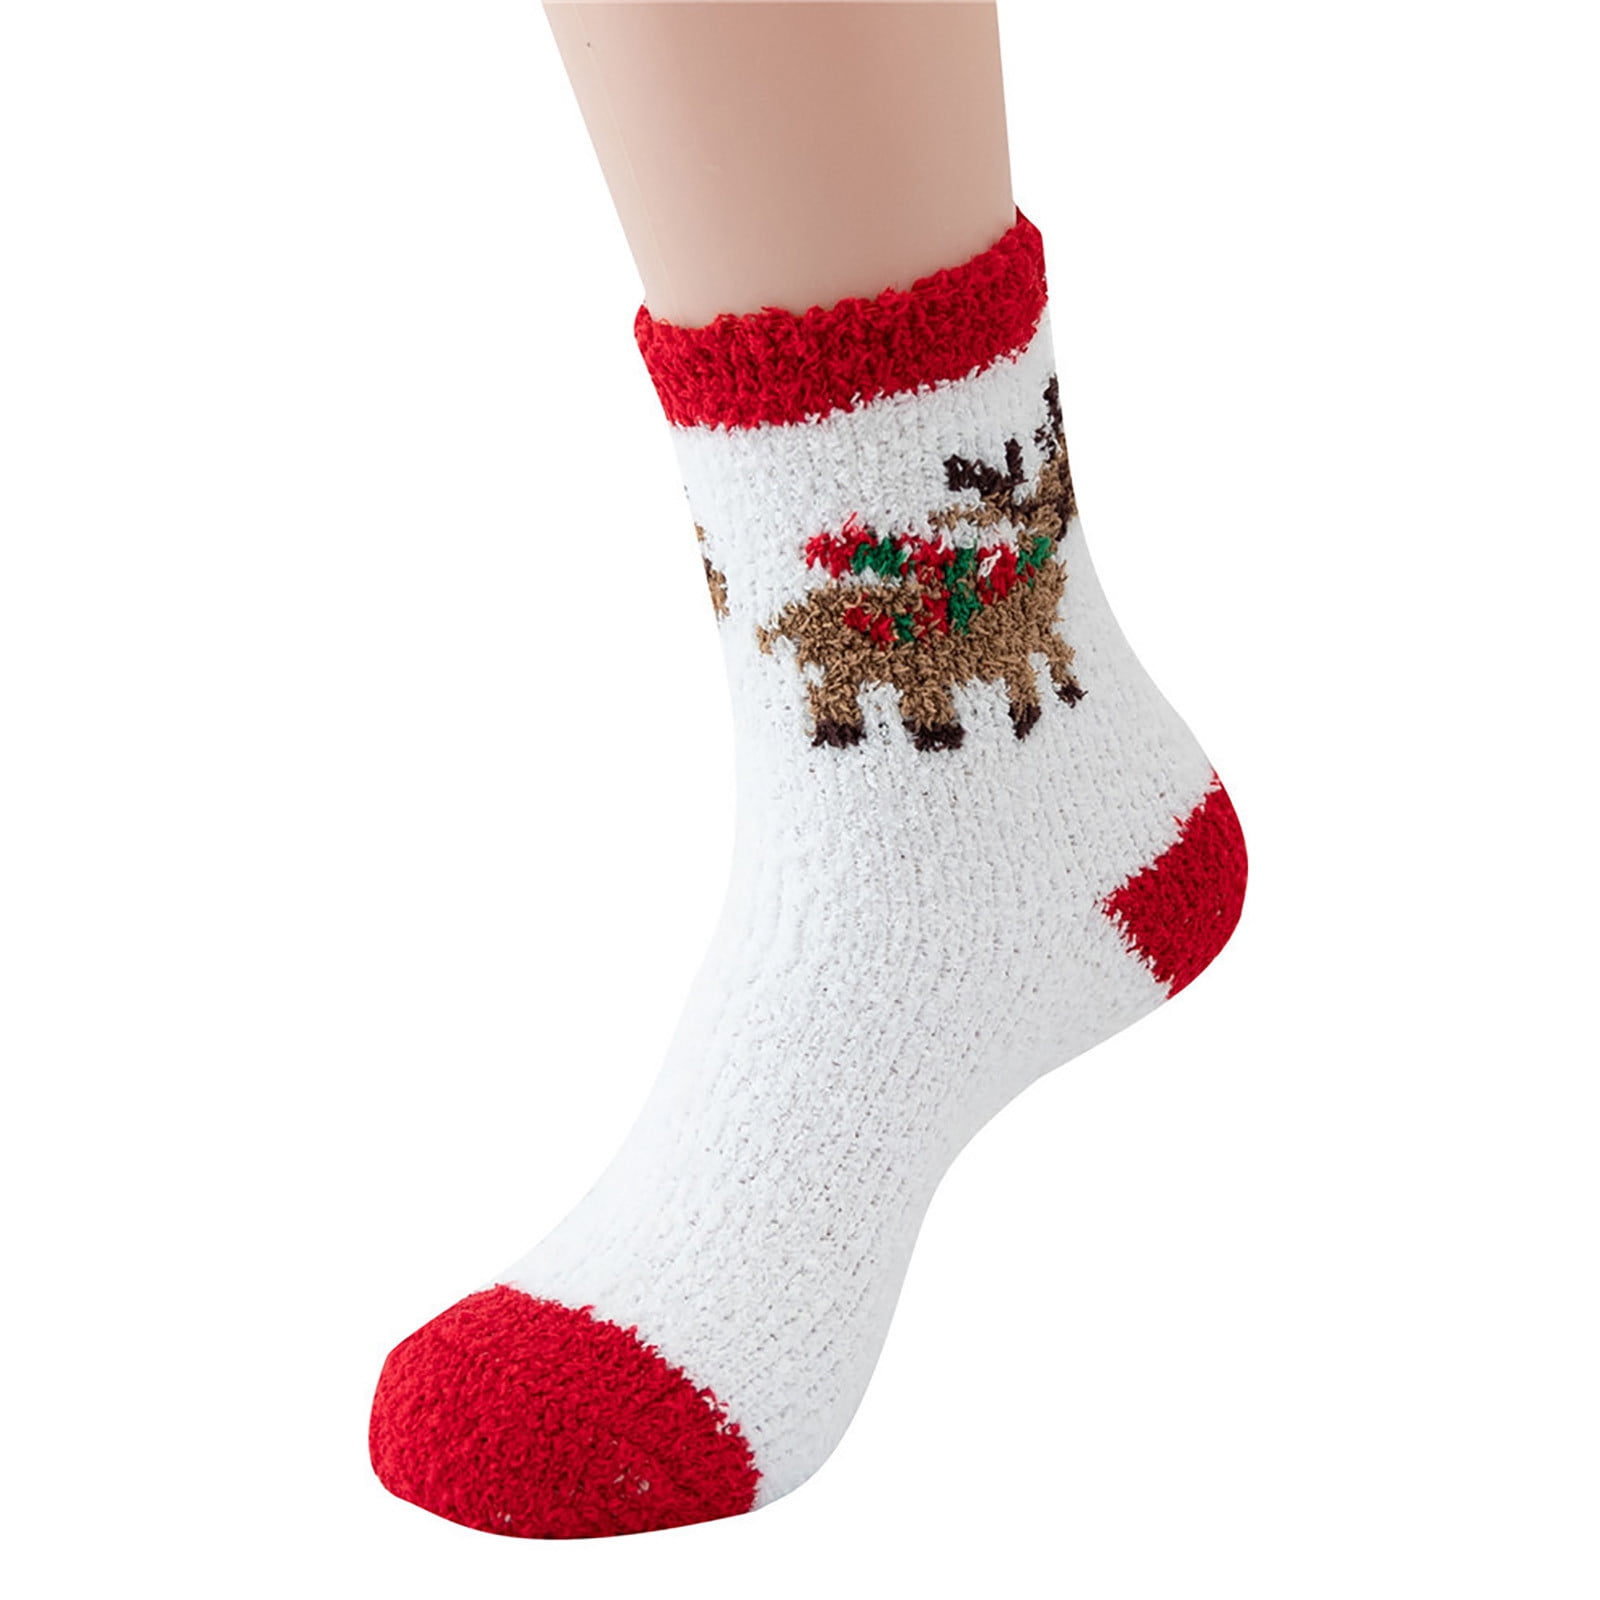 ICHUANYI Christmas Cute Fuzzy Socks for Women Girls Gifts Funny Cozy ...